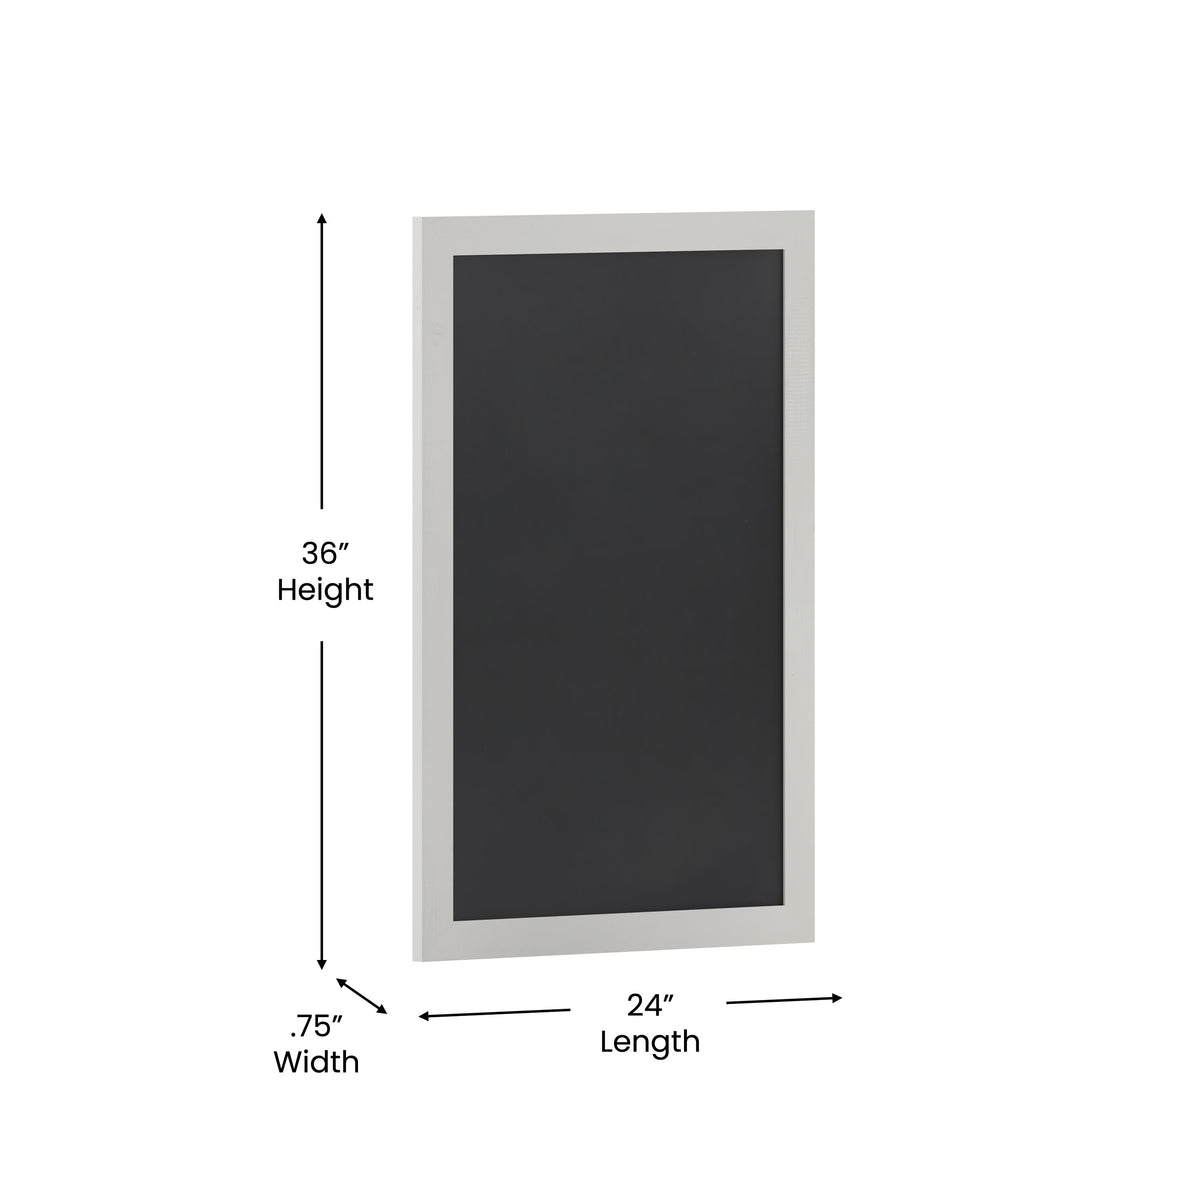 Solid White,24inchW x 0.75inchD x 36inchH |#| 24inch x 36inch Wall Mounted Magnetic Chalkboard with Wooden Frame -White